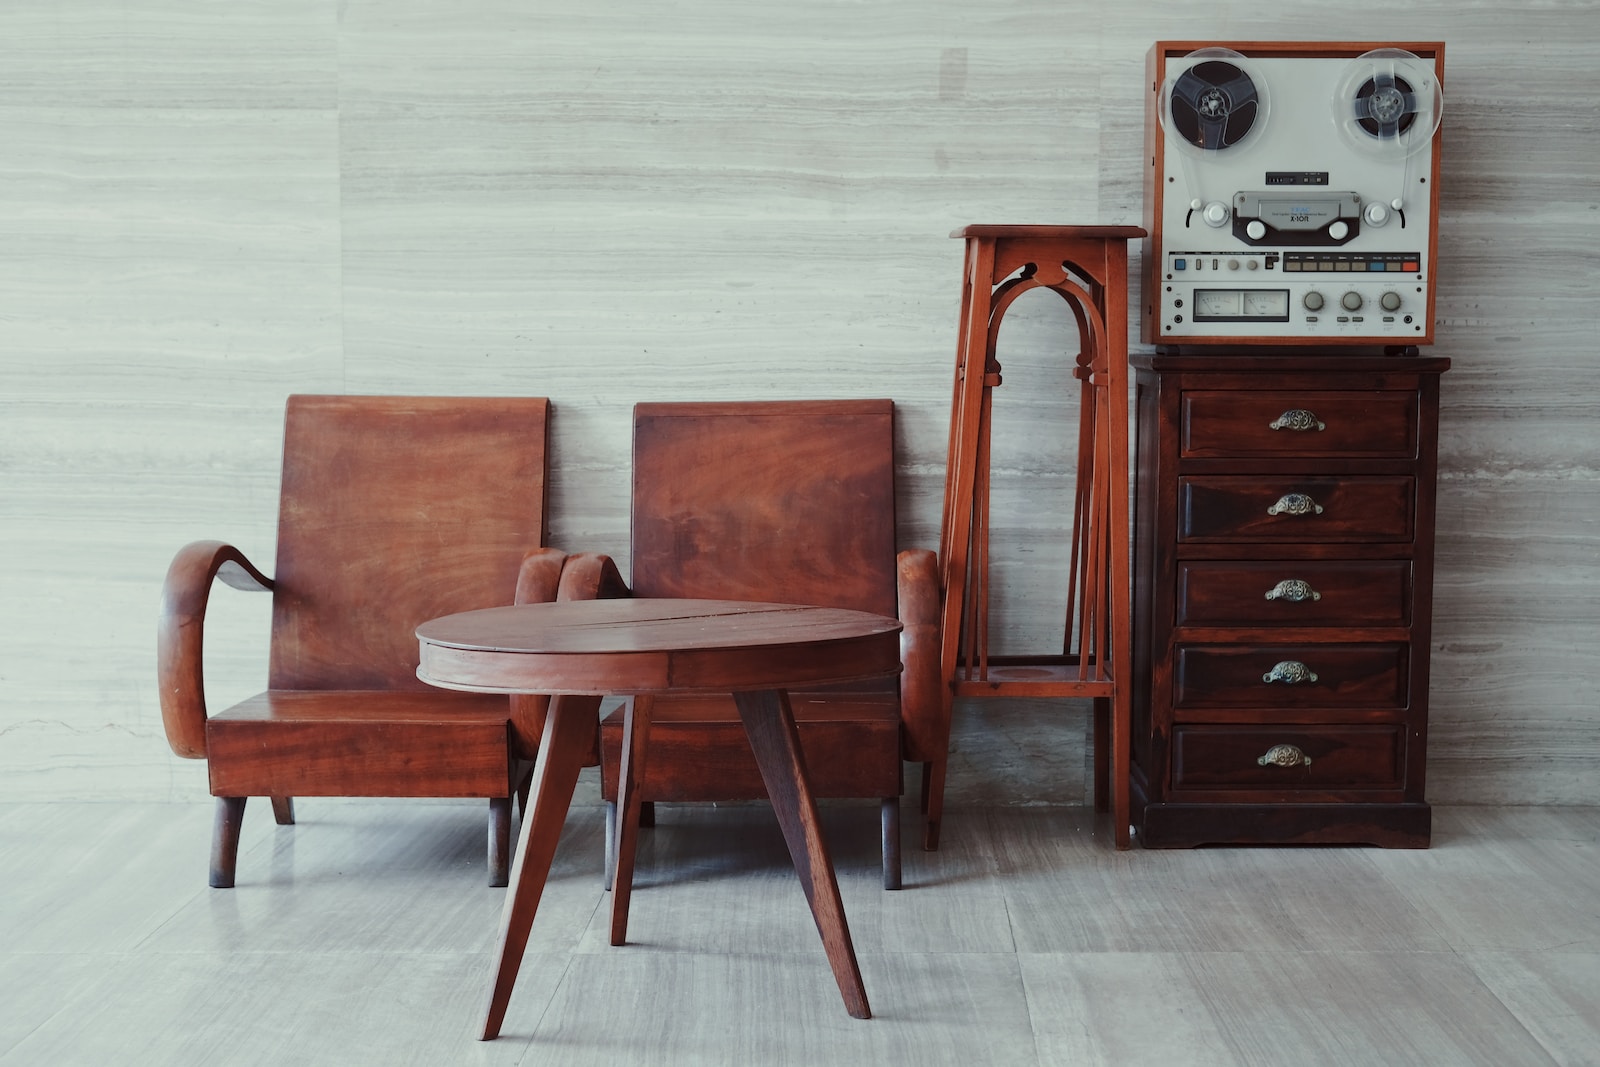 brown wooden chairs, table, and cabinet